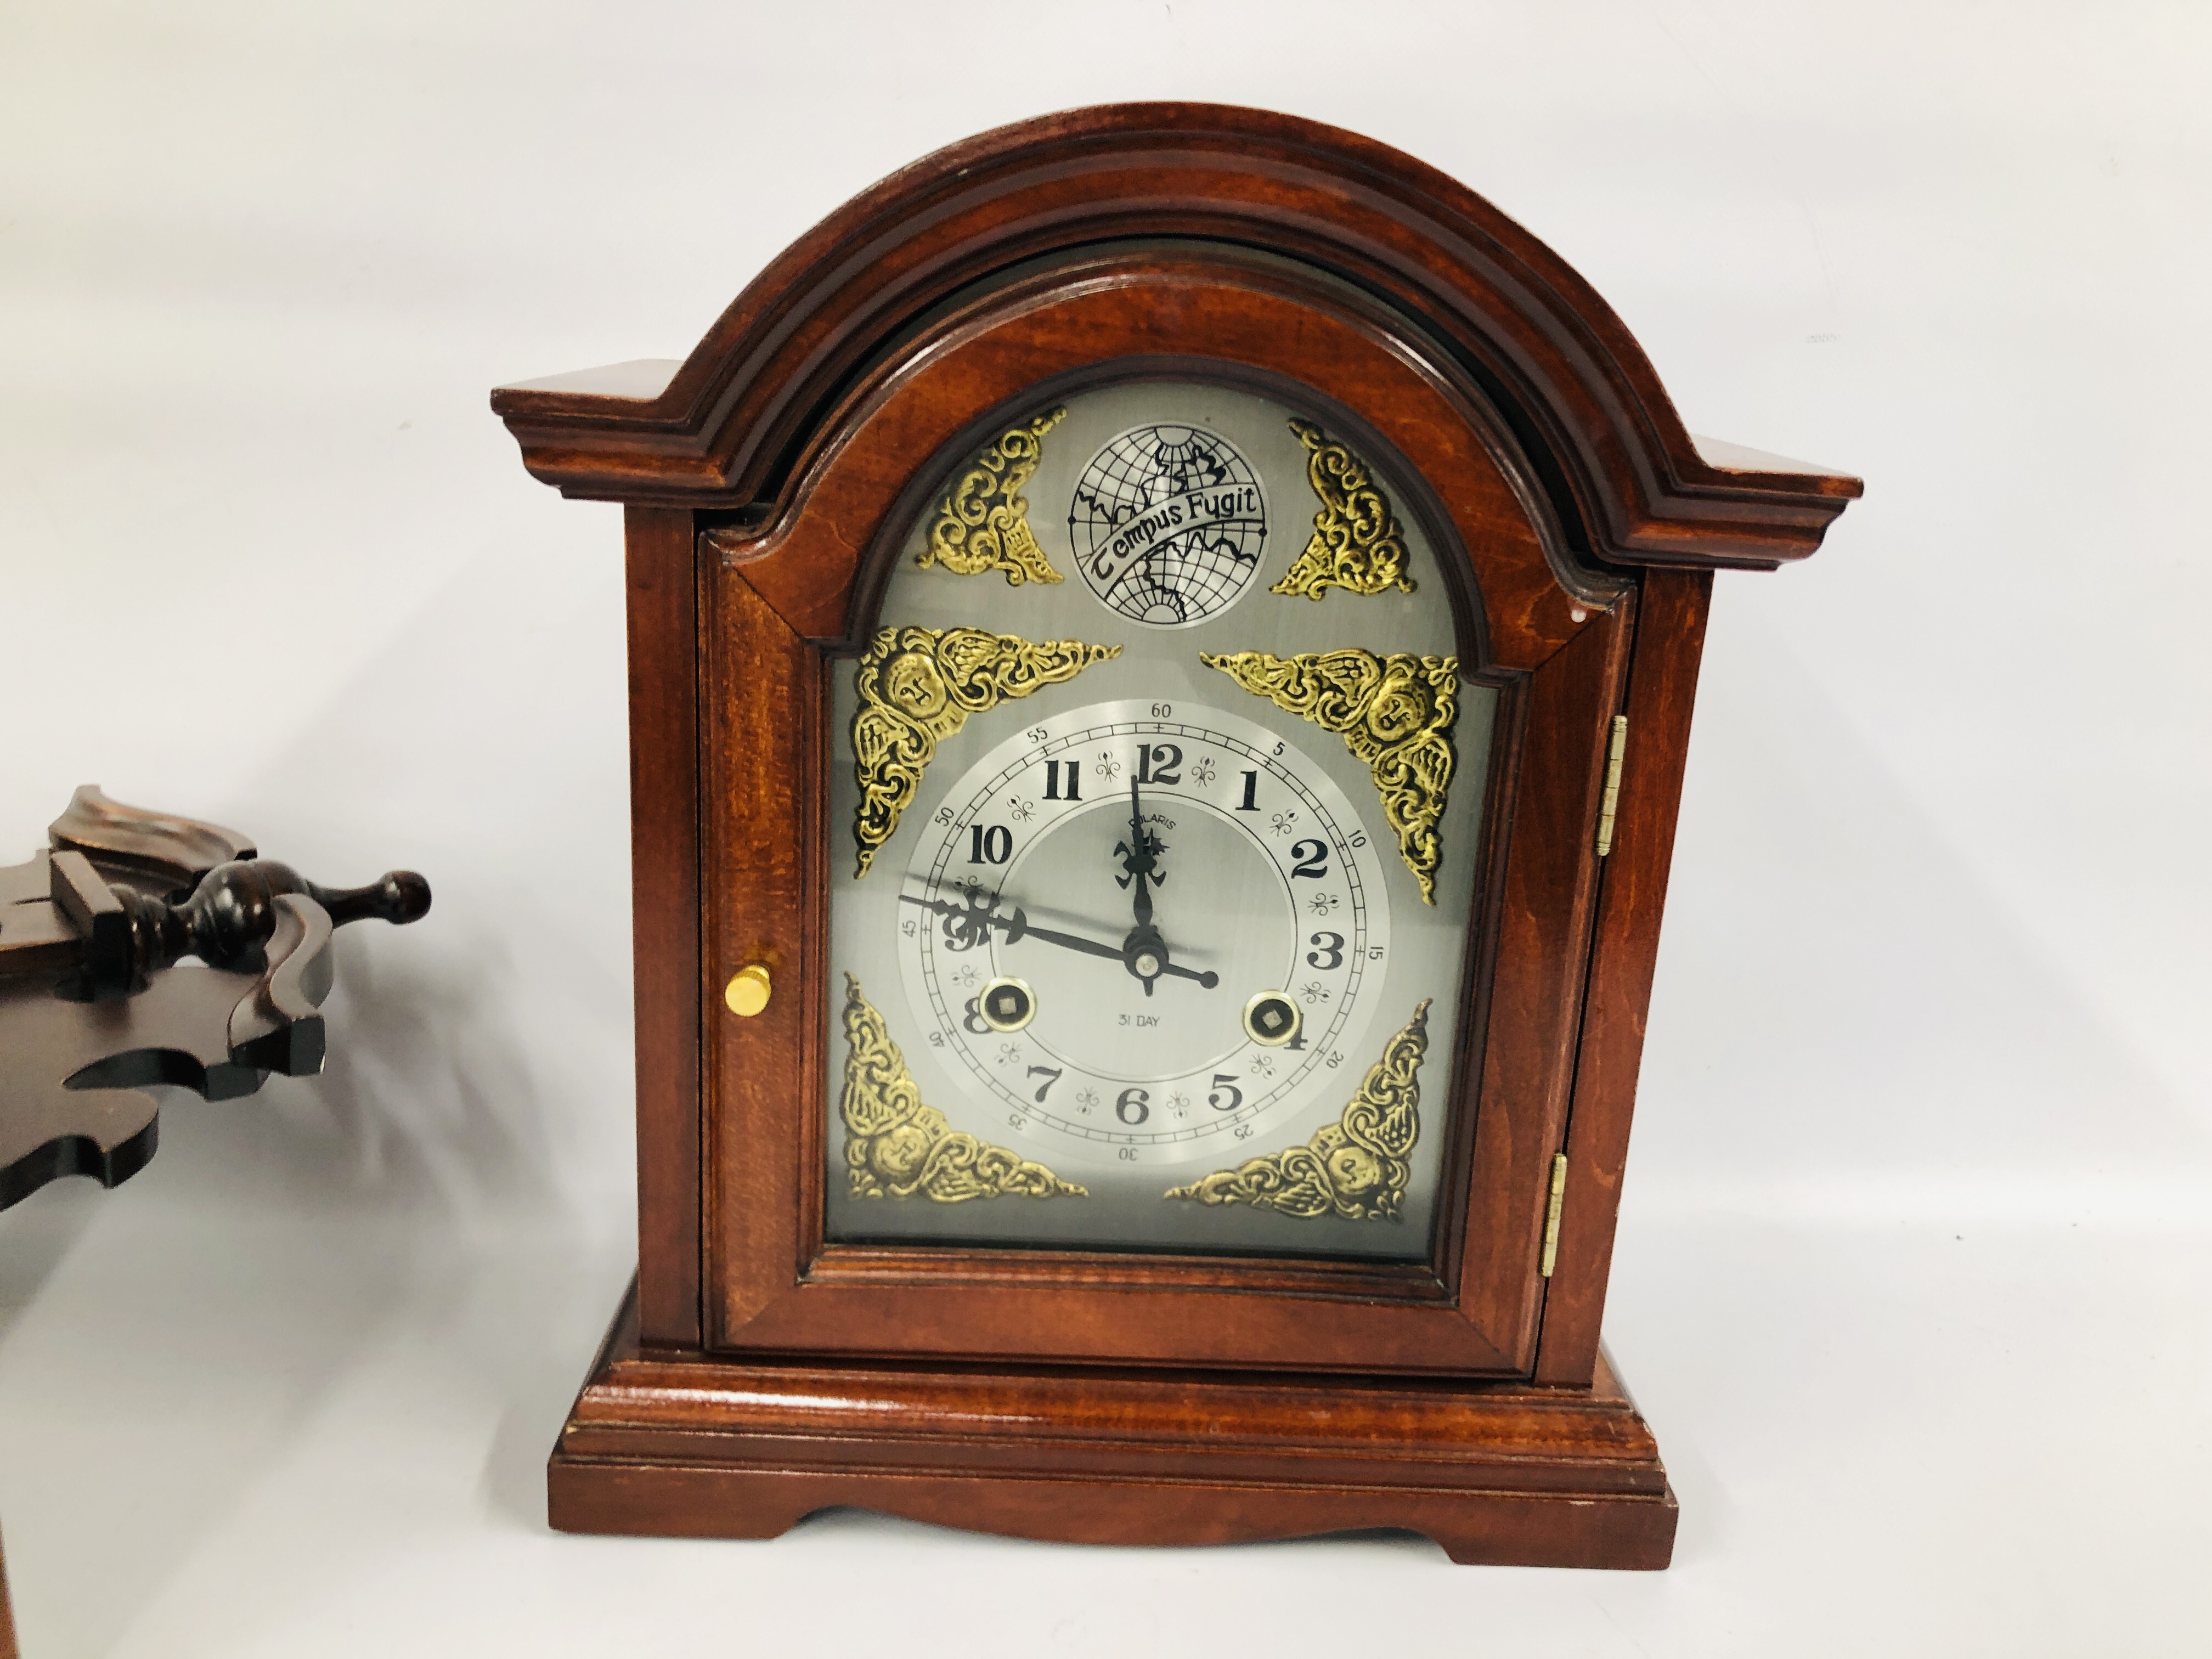 MODERN MAHOGANY FINISH MANTEL CLOCK ALONG WITH TWO WALL CLOCKS ONE MARKED LINCOLN THE OTHER WILLIAM - Image 4 of 6